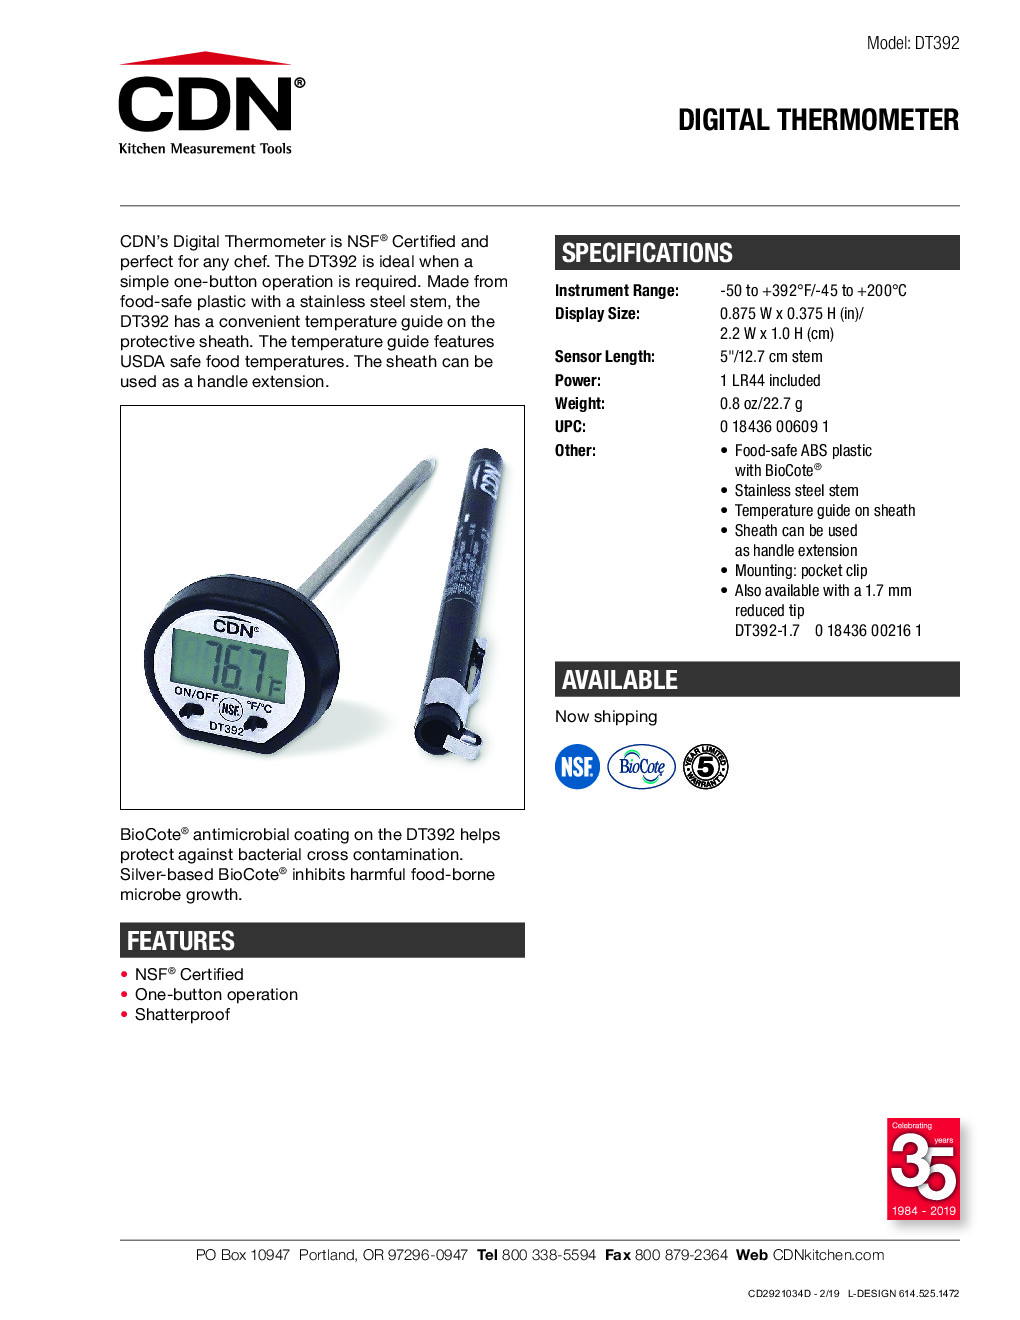 CDN DT392 Pocket Thermometer